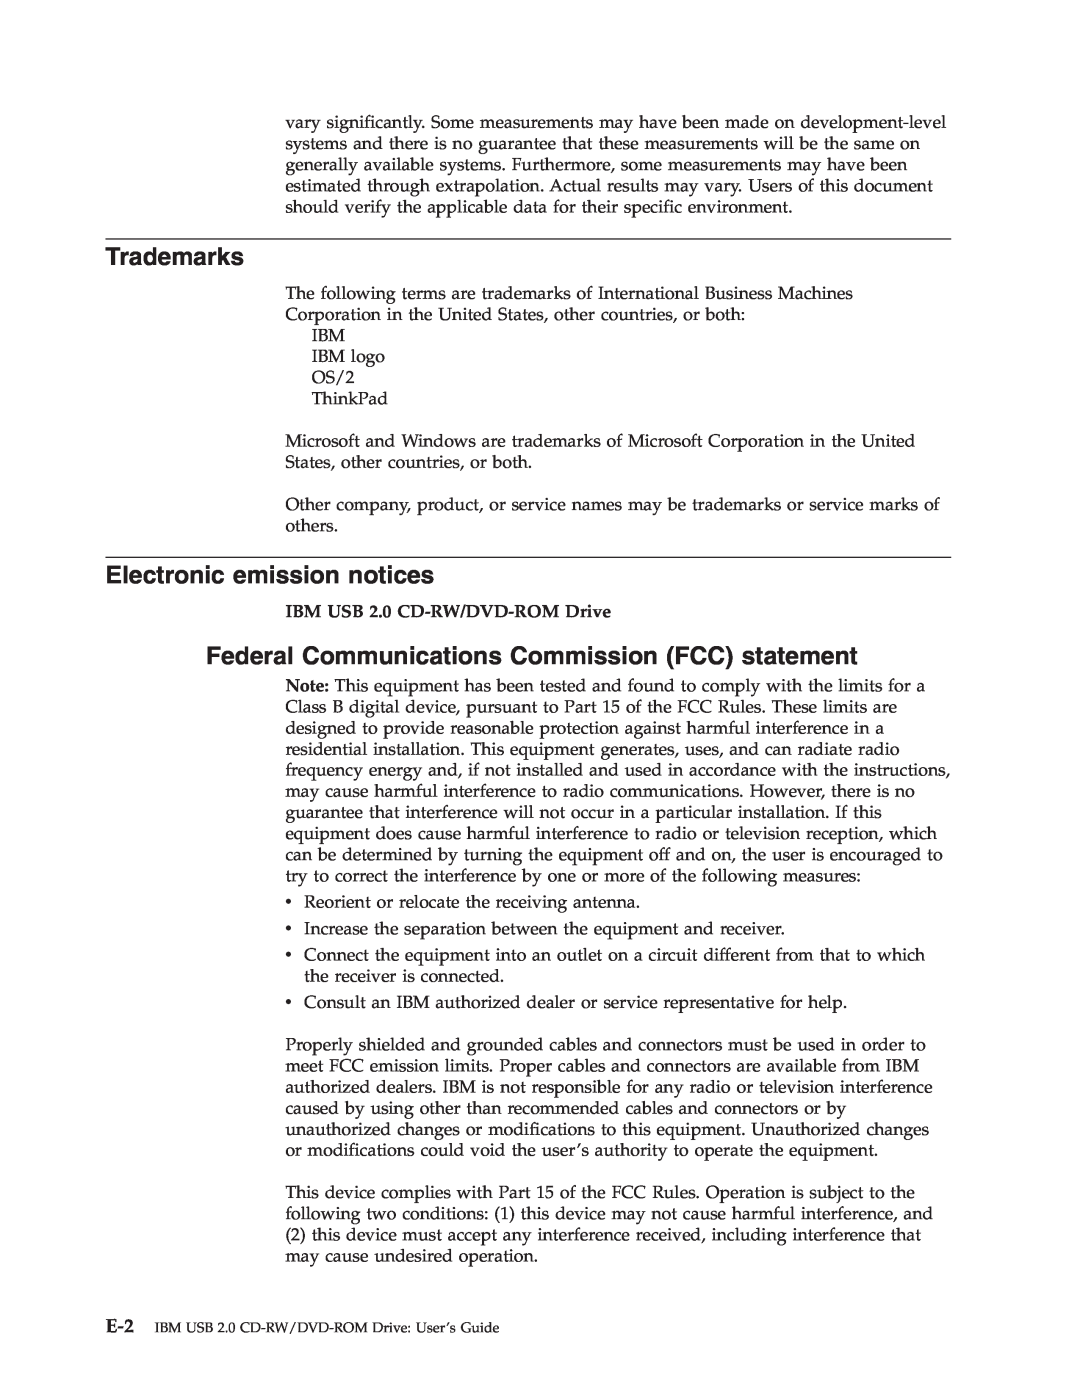 IBM 73P4518 manual Trademarks, Electronic emission notices, Federal Communications Commission FCC statement 